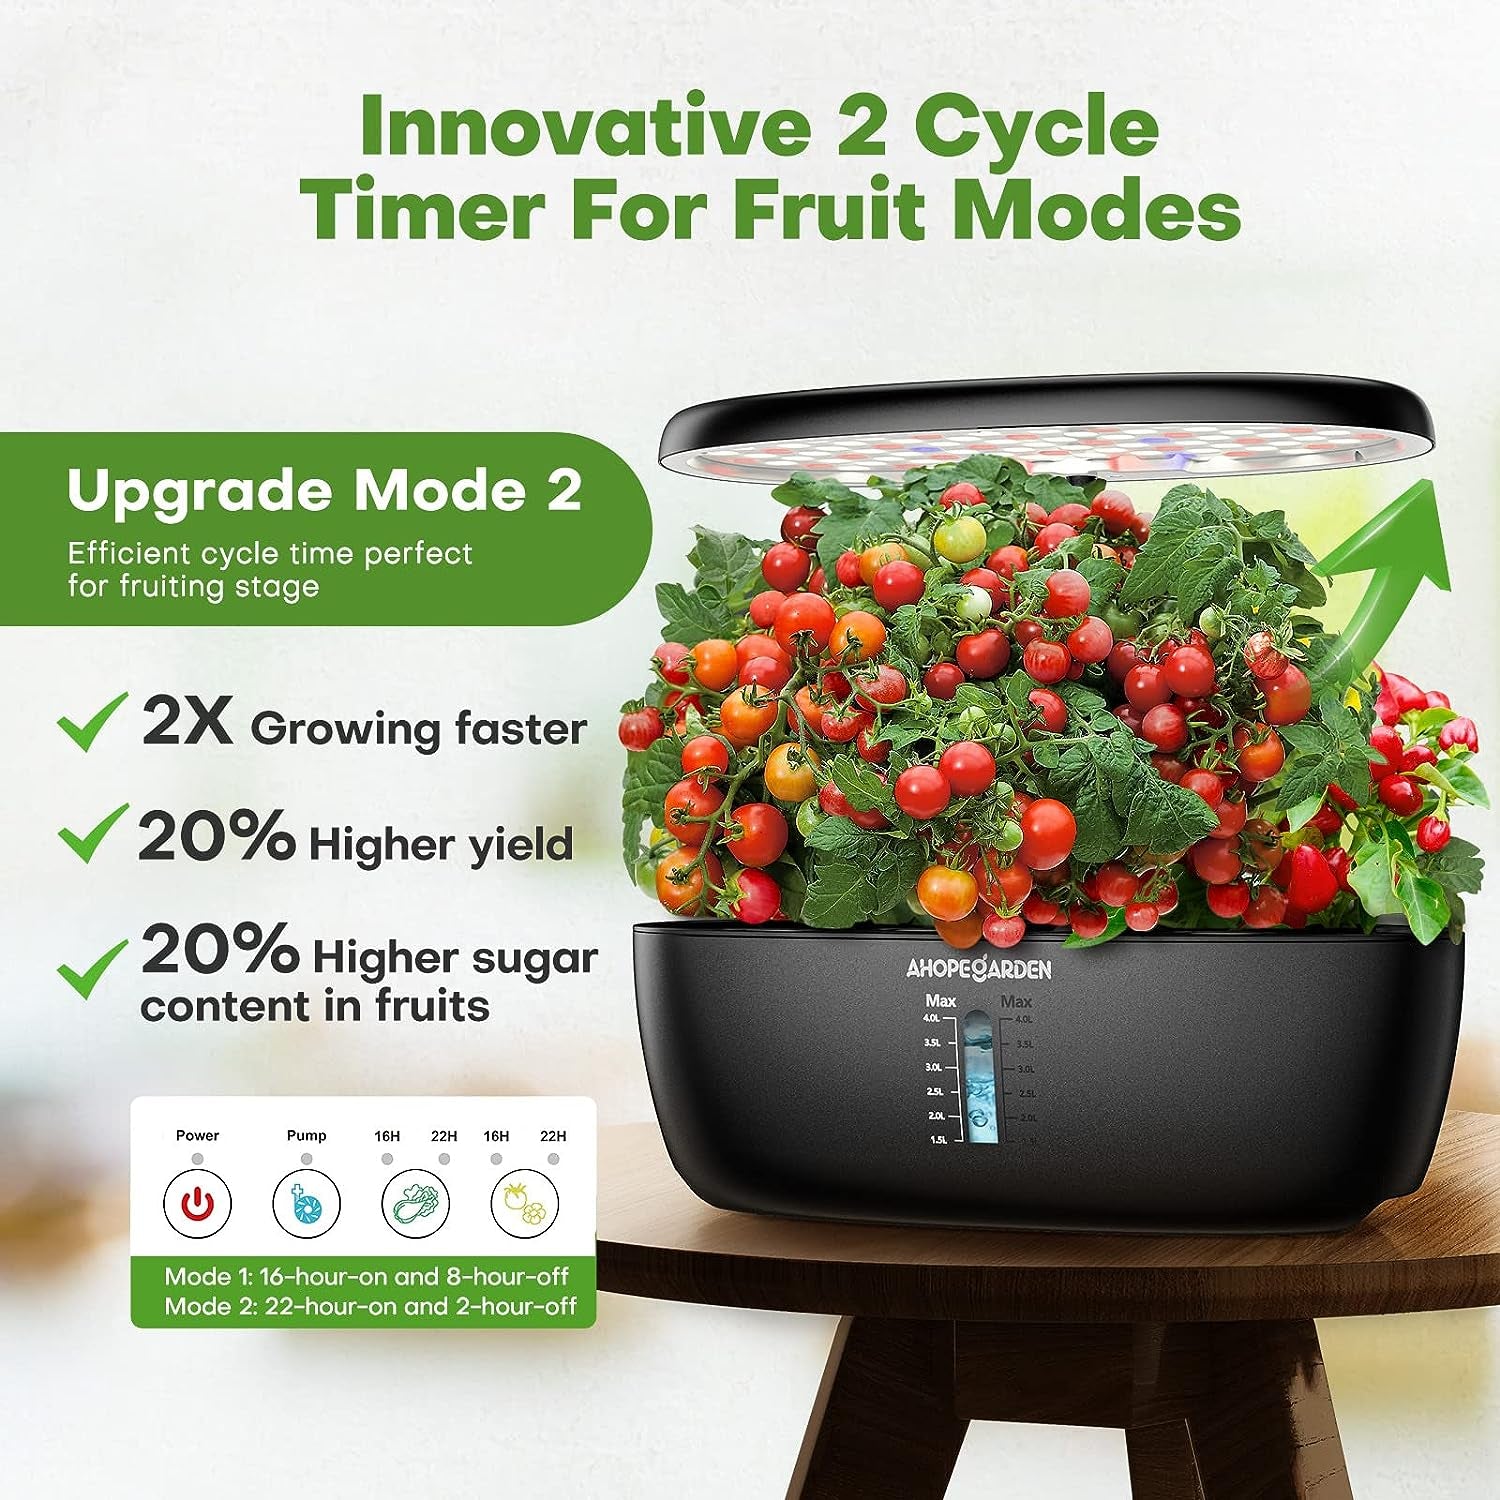 Hydroponics Growing System Garden Kit : 12 Pods Plant Germination Kit Herb Indoor Garden Growth Lamp Countertop with LED Grow Light Hydroponic Planter Grower Harvest Vegetable Lettuce Black